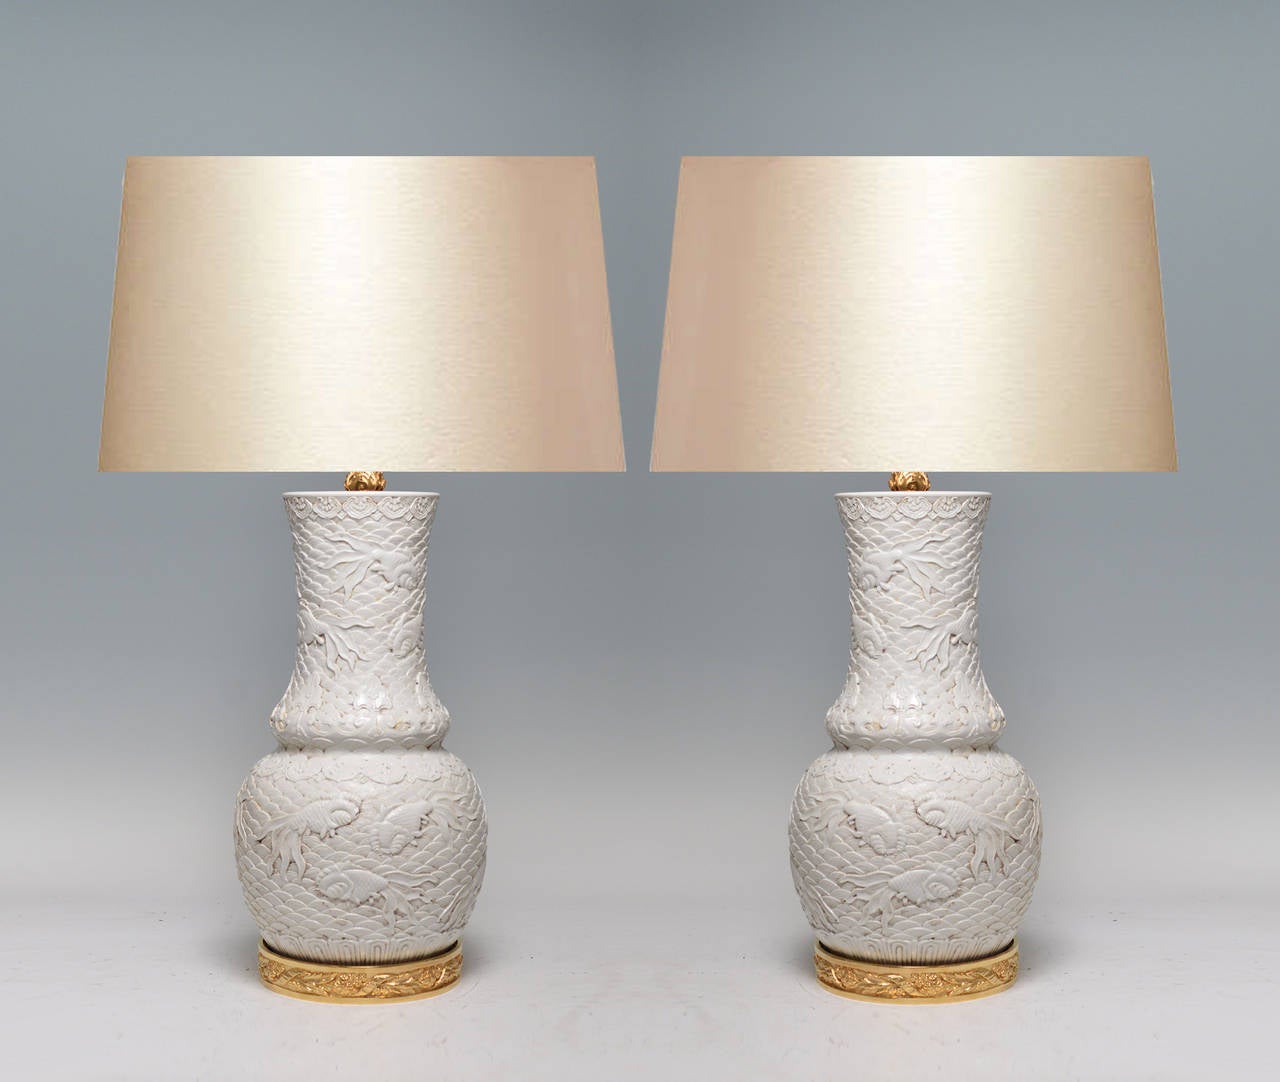 Fine carved white porcelain lamps with golden fish swimming in the stylish wave decorations gilt bronze bases.